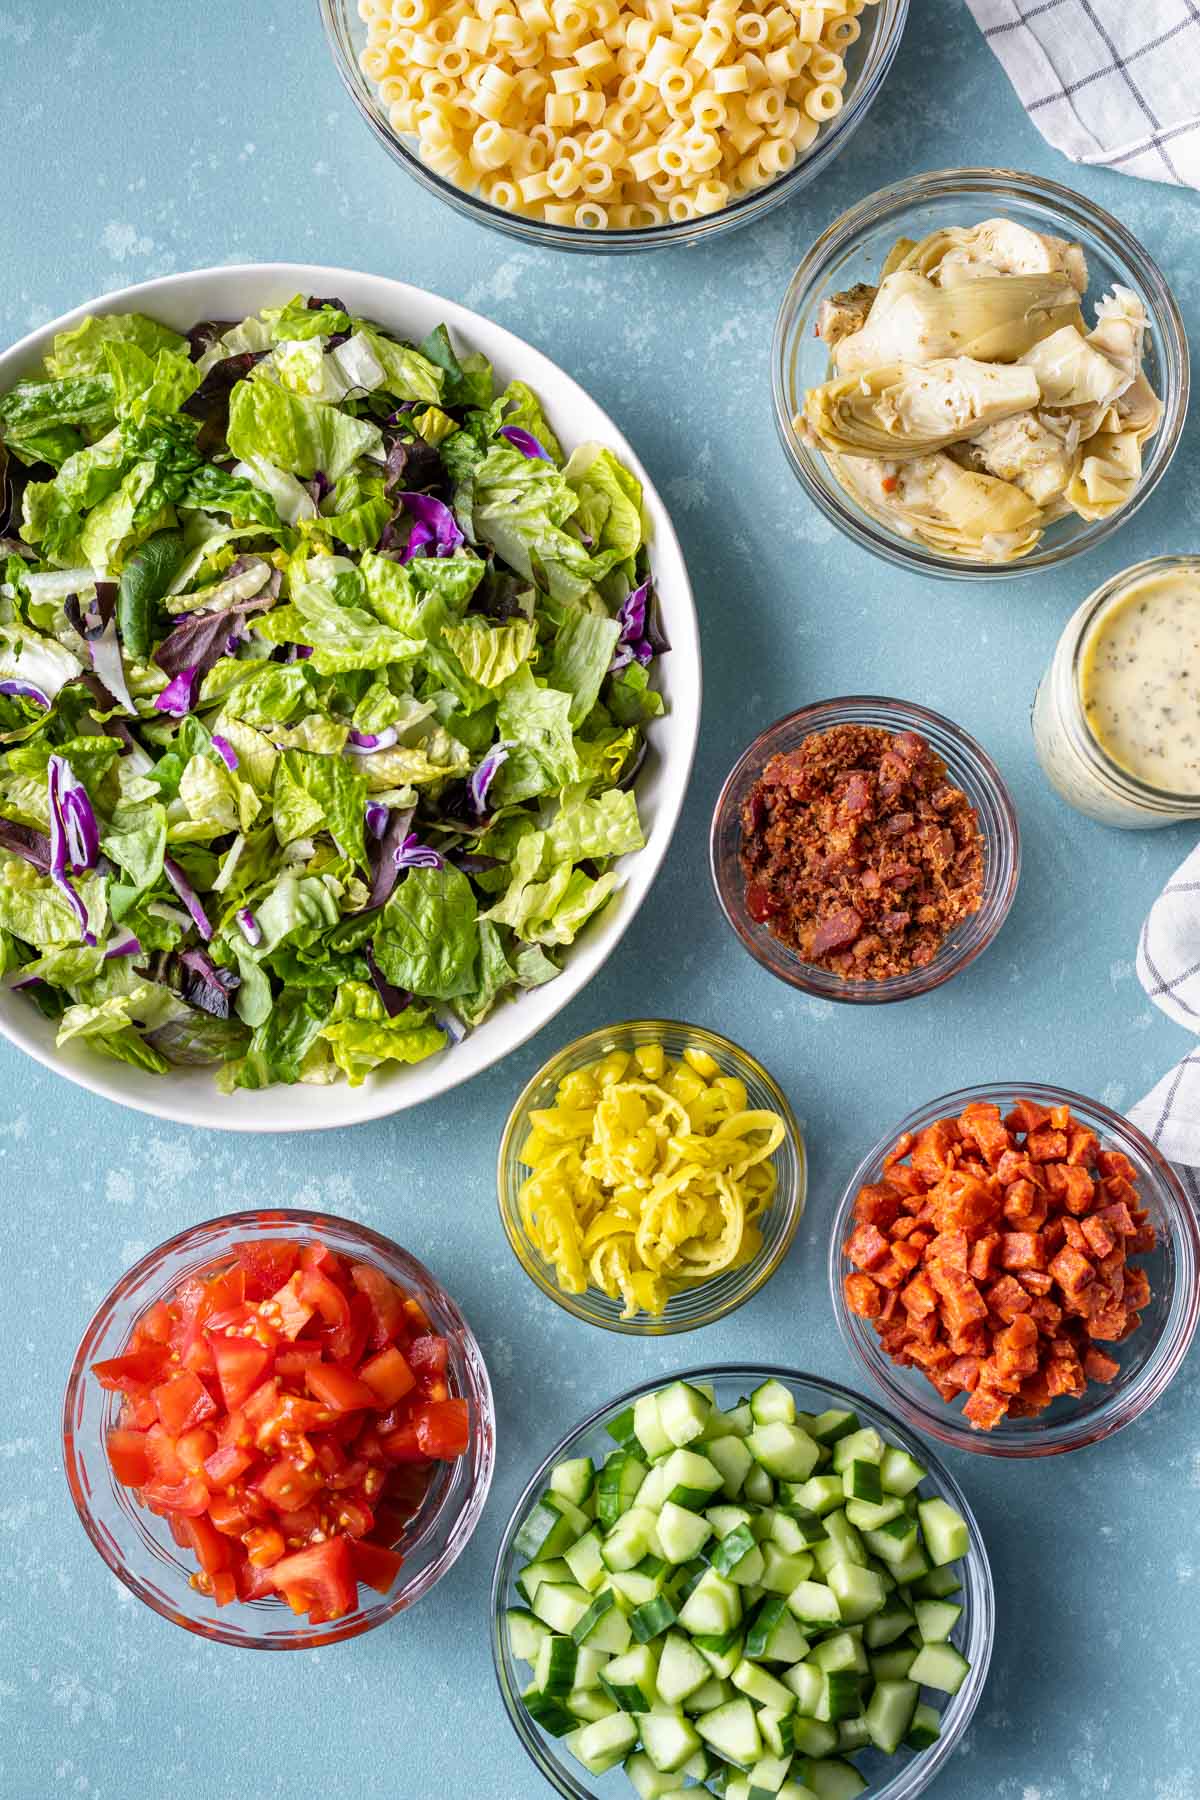 ingredients for an Italian chopped salad recipe